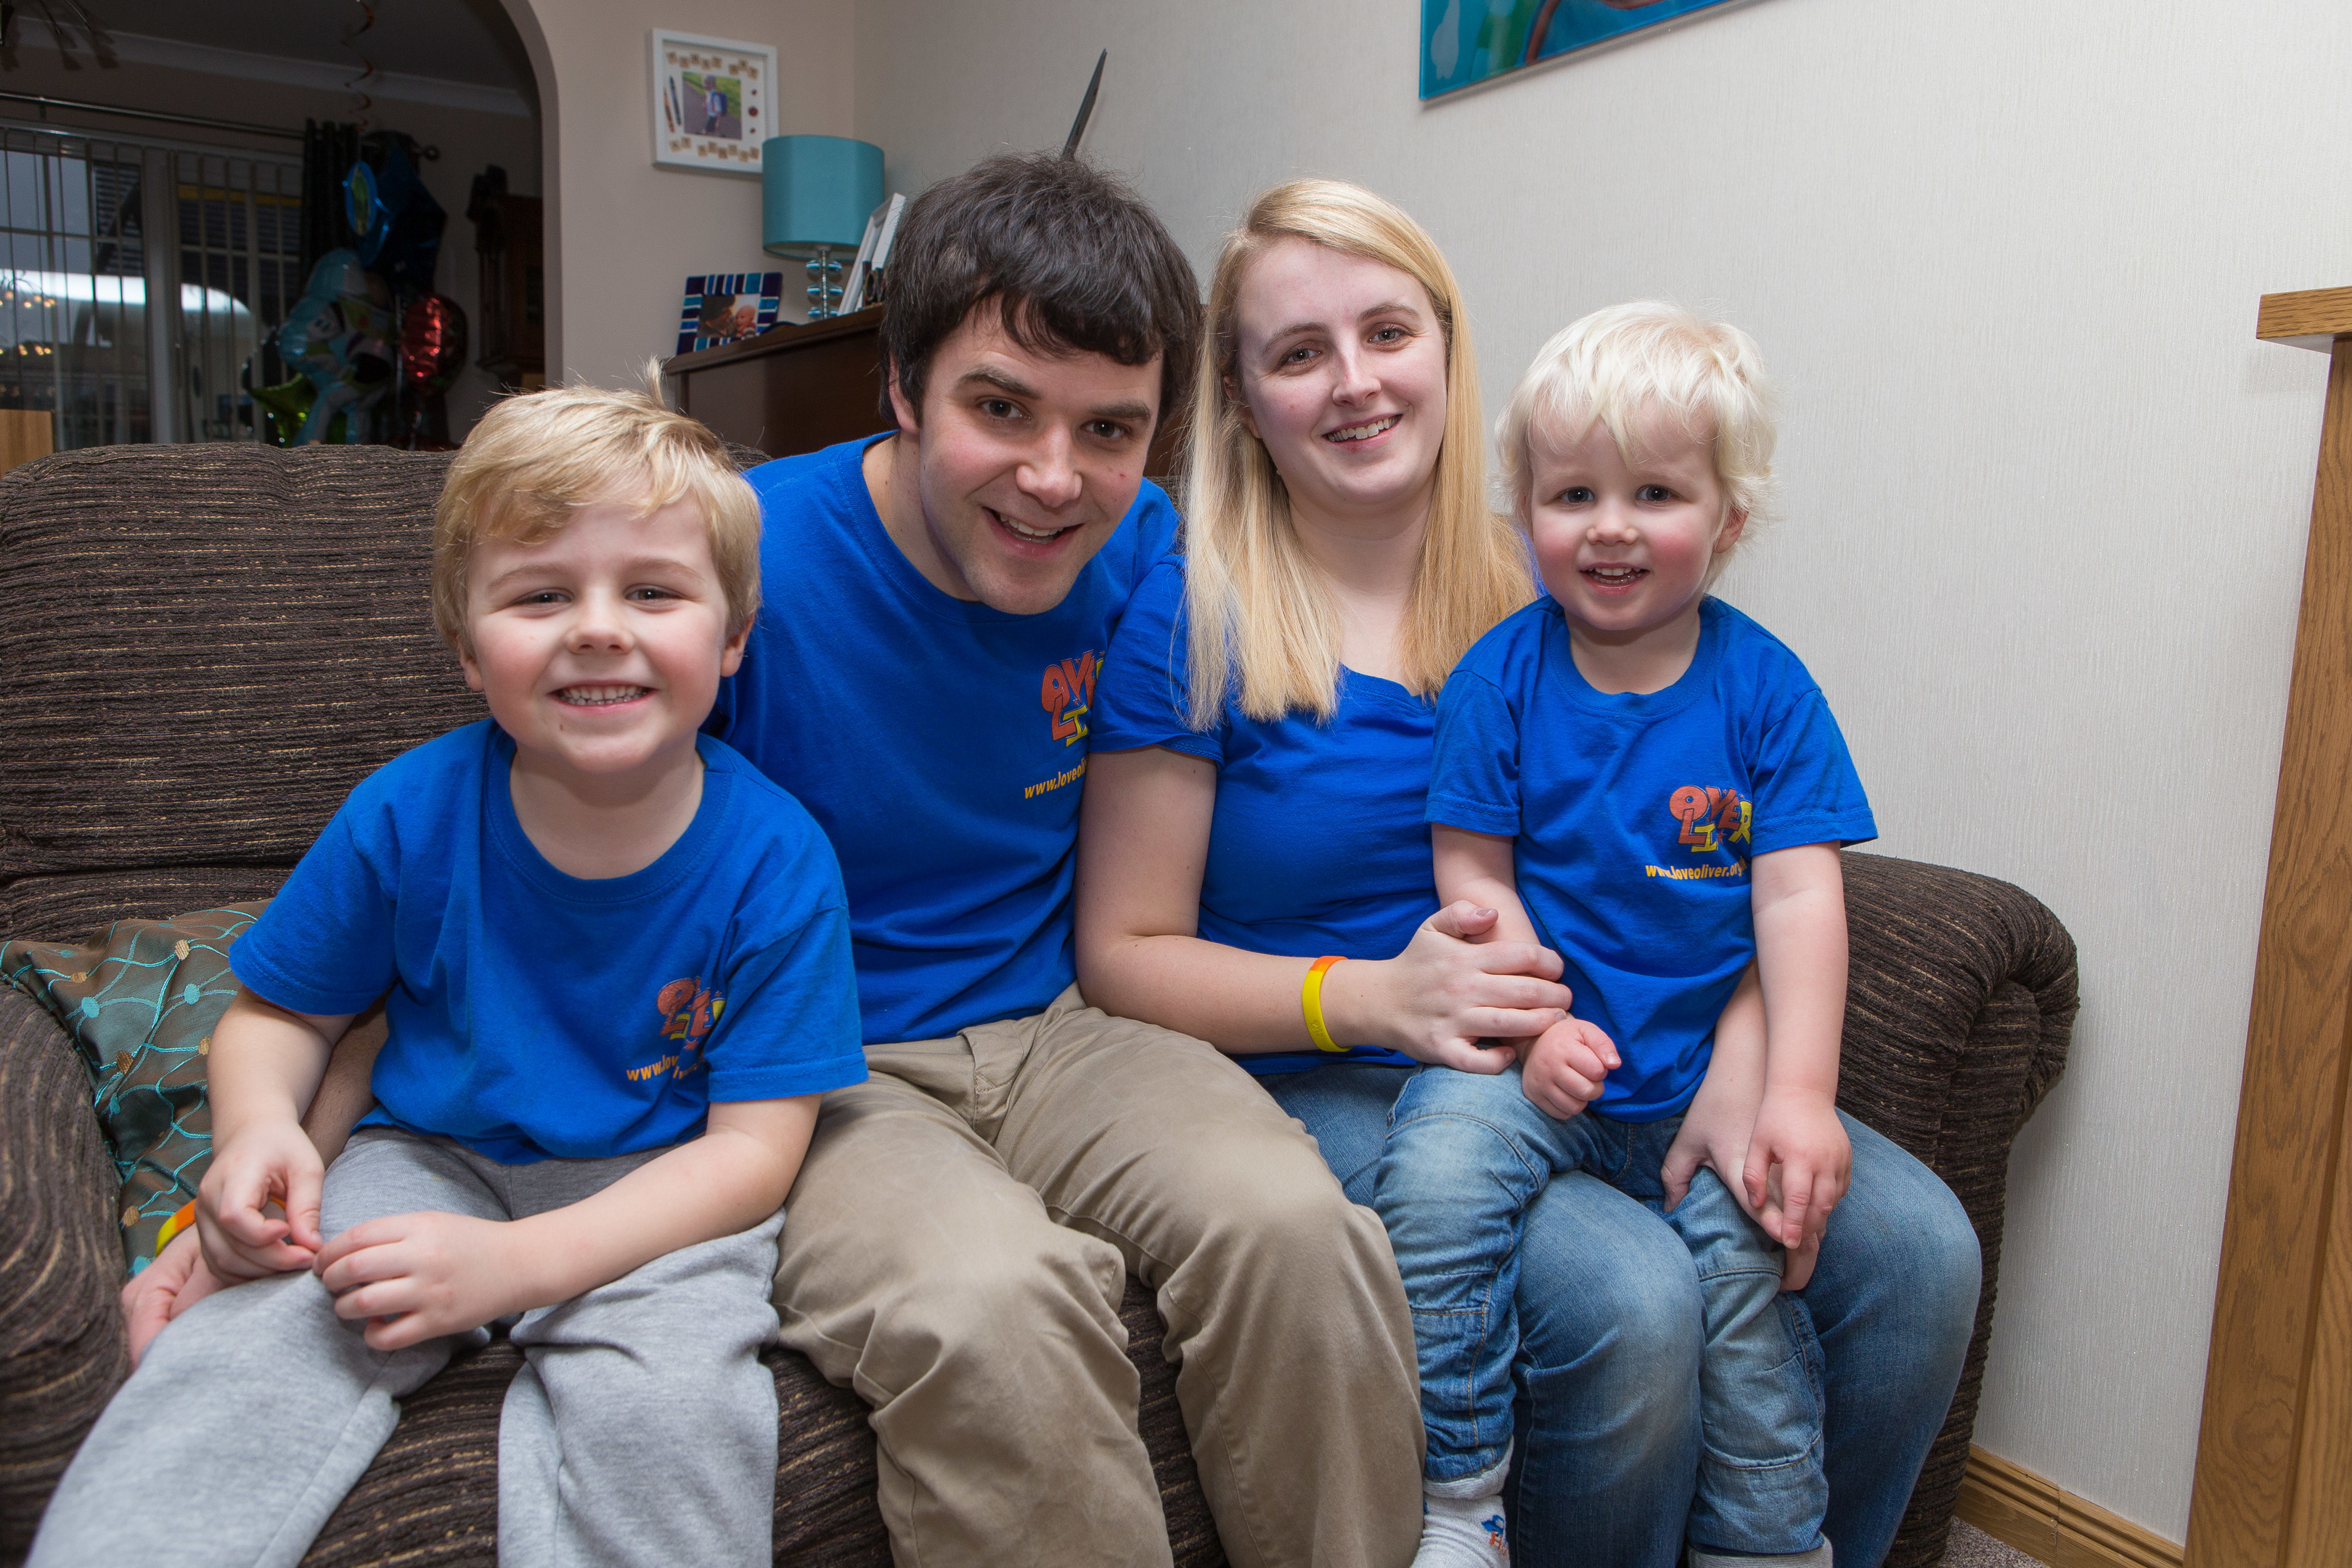 Pictured from left Micah, 5, Andy Gill, 32, Jennifer Gill, 31, and Rory, 2.